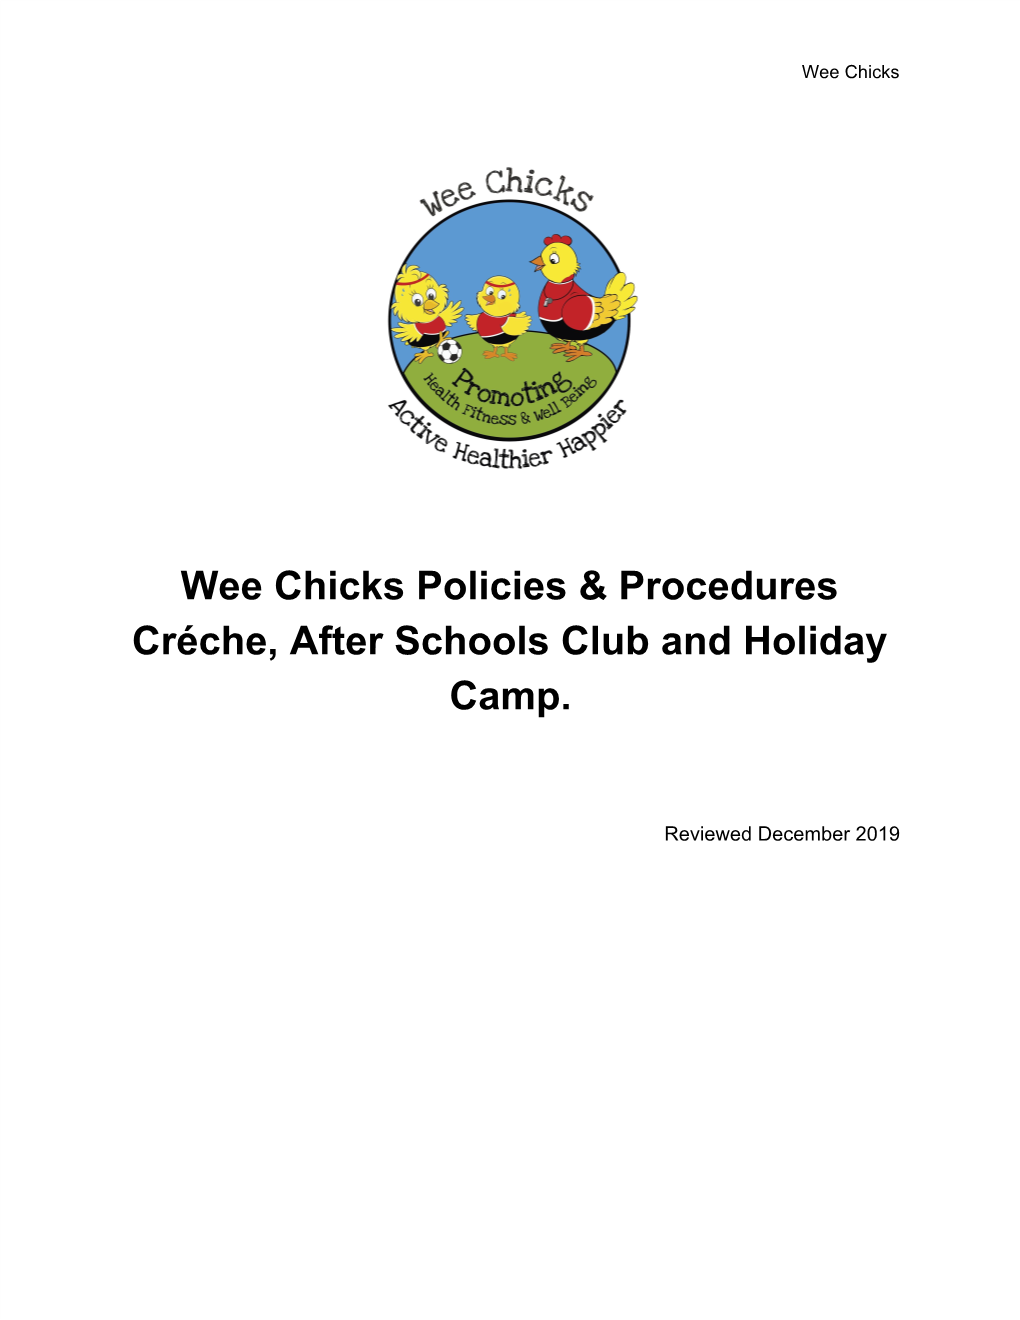 Wee Chicks Policies & Procedures Créche, After Schools Club And